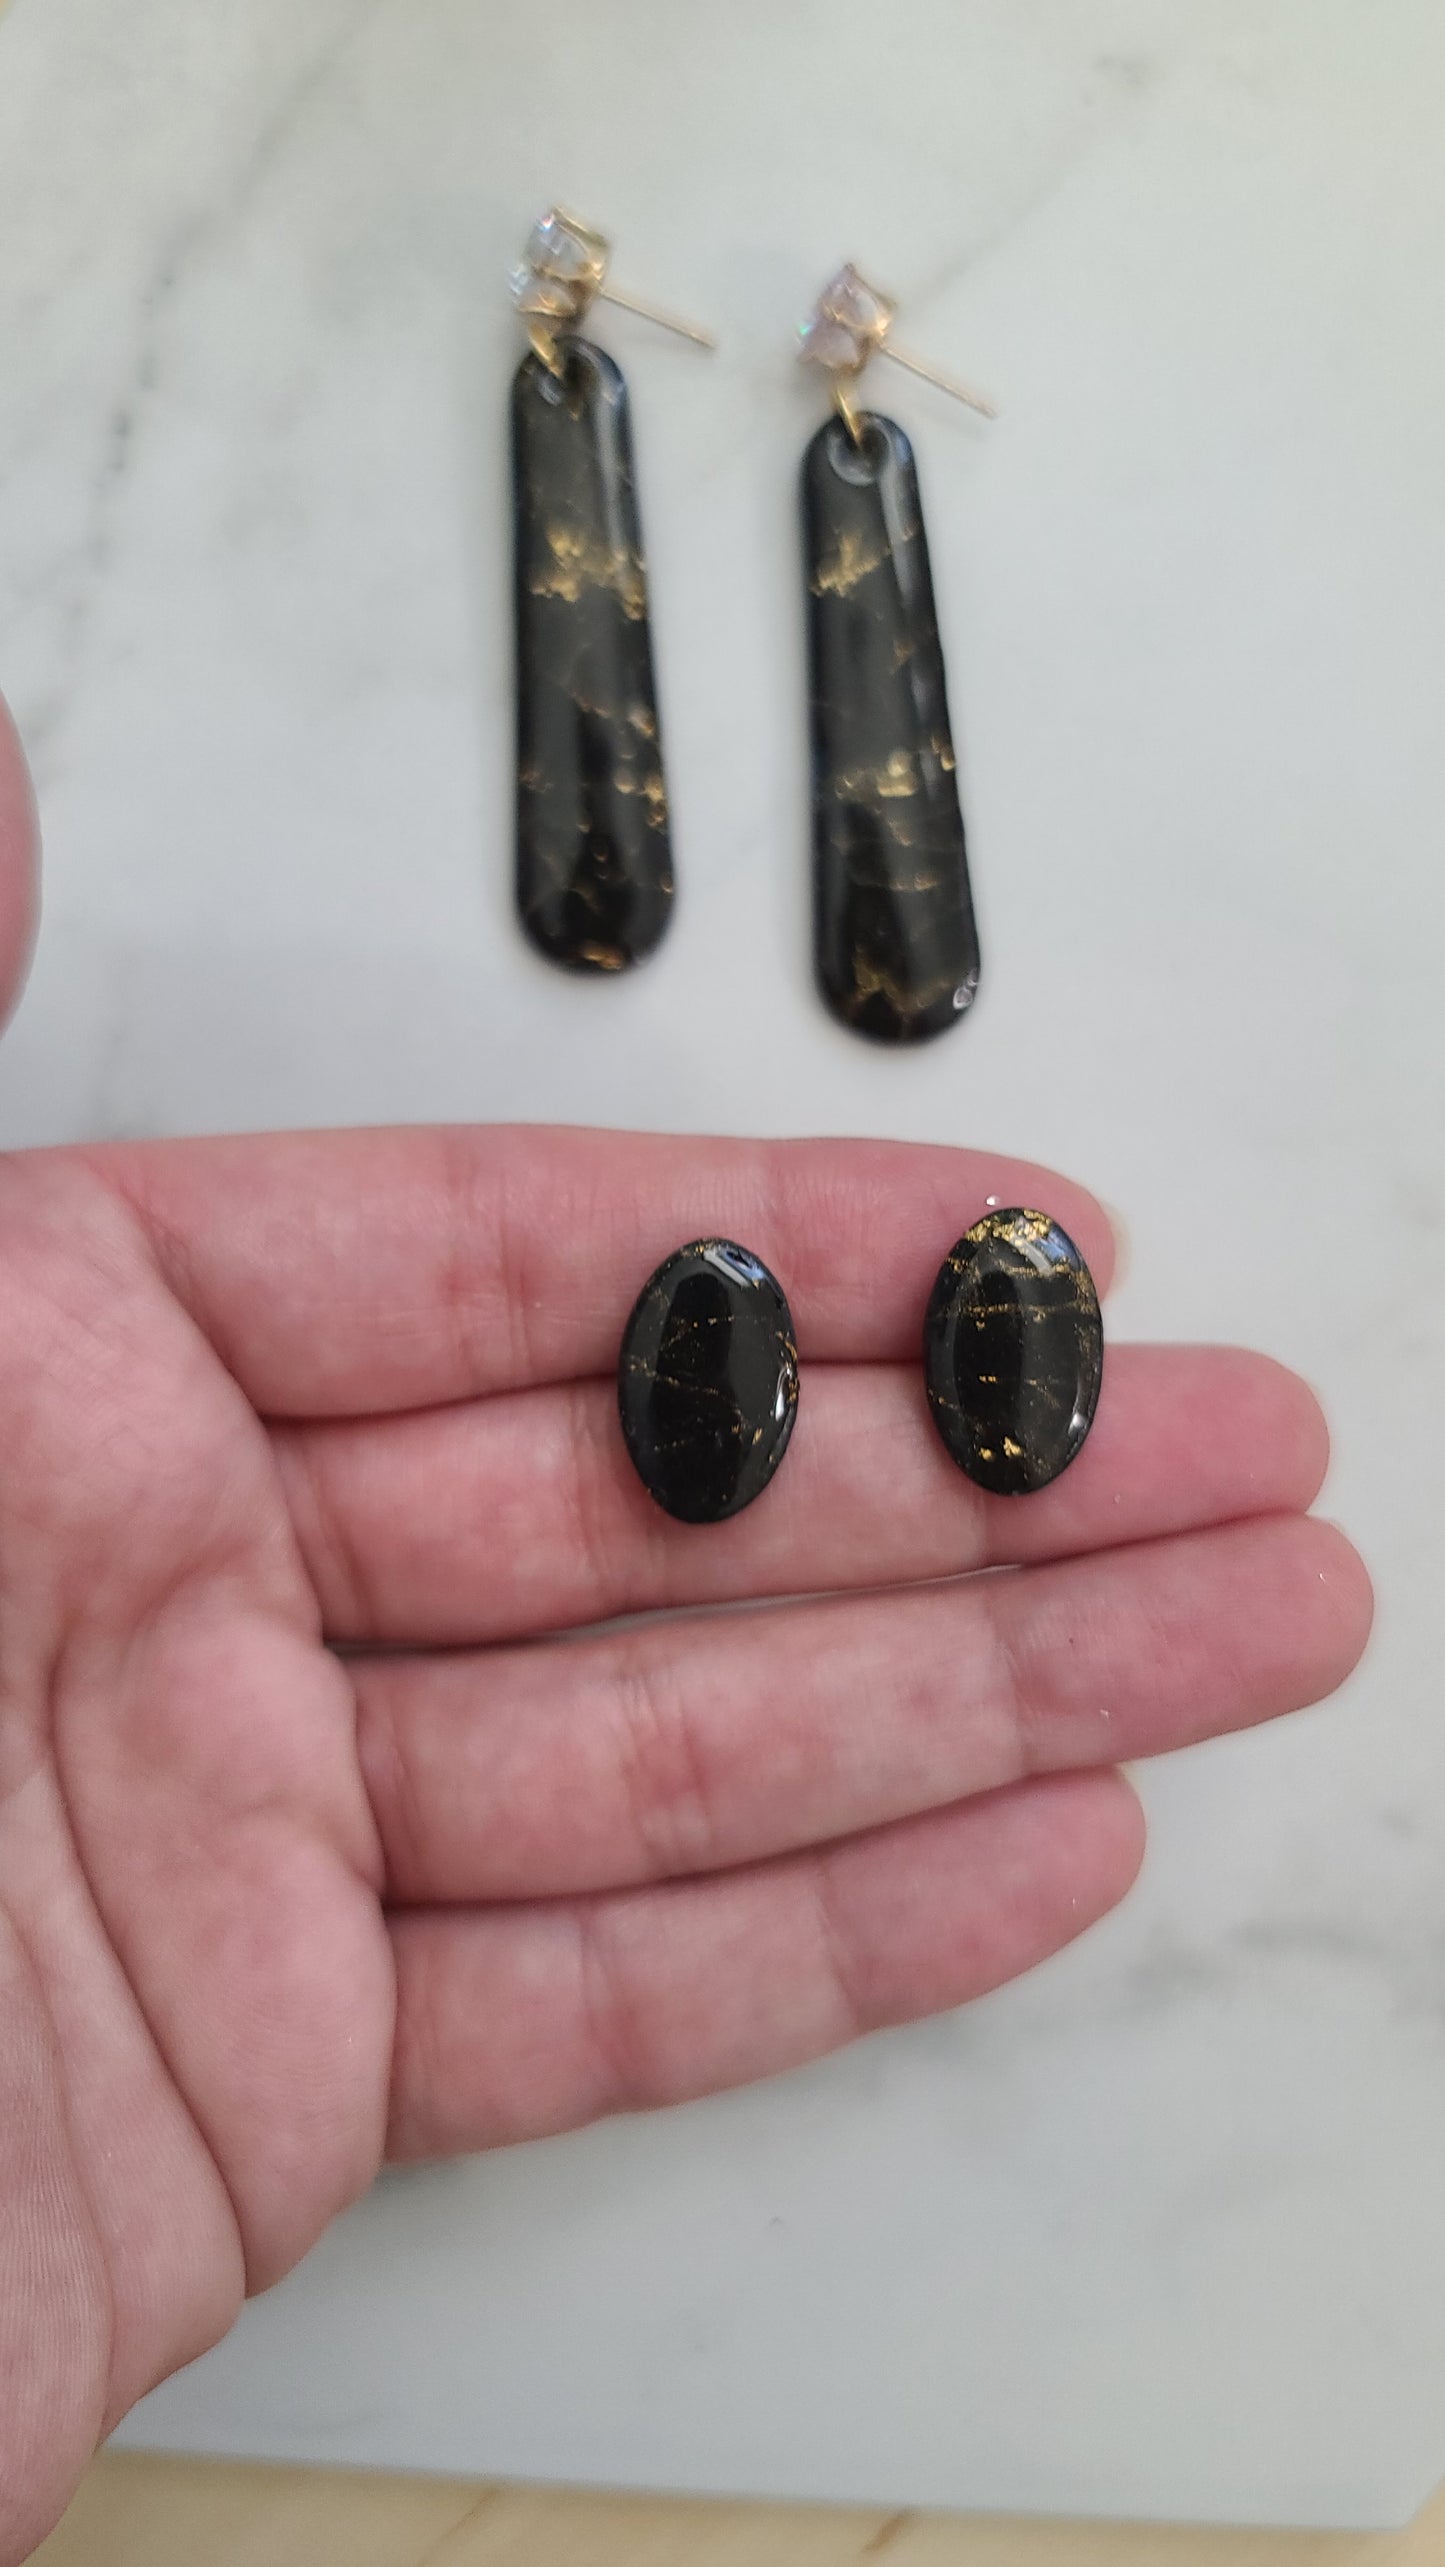 Black and Gold marbled stud earrings